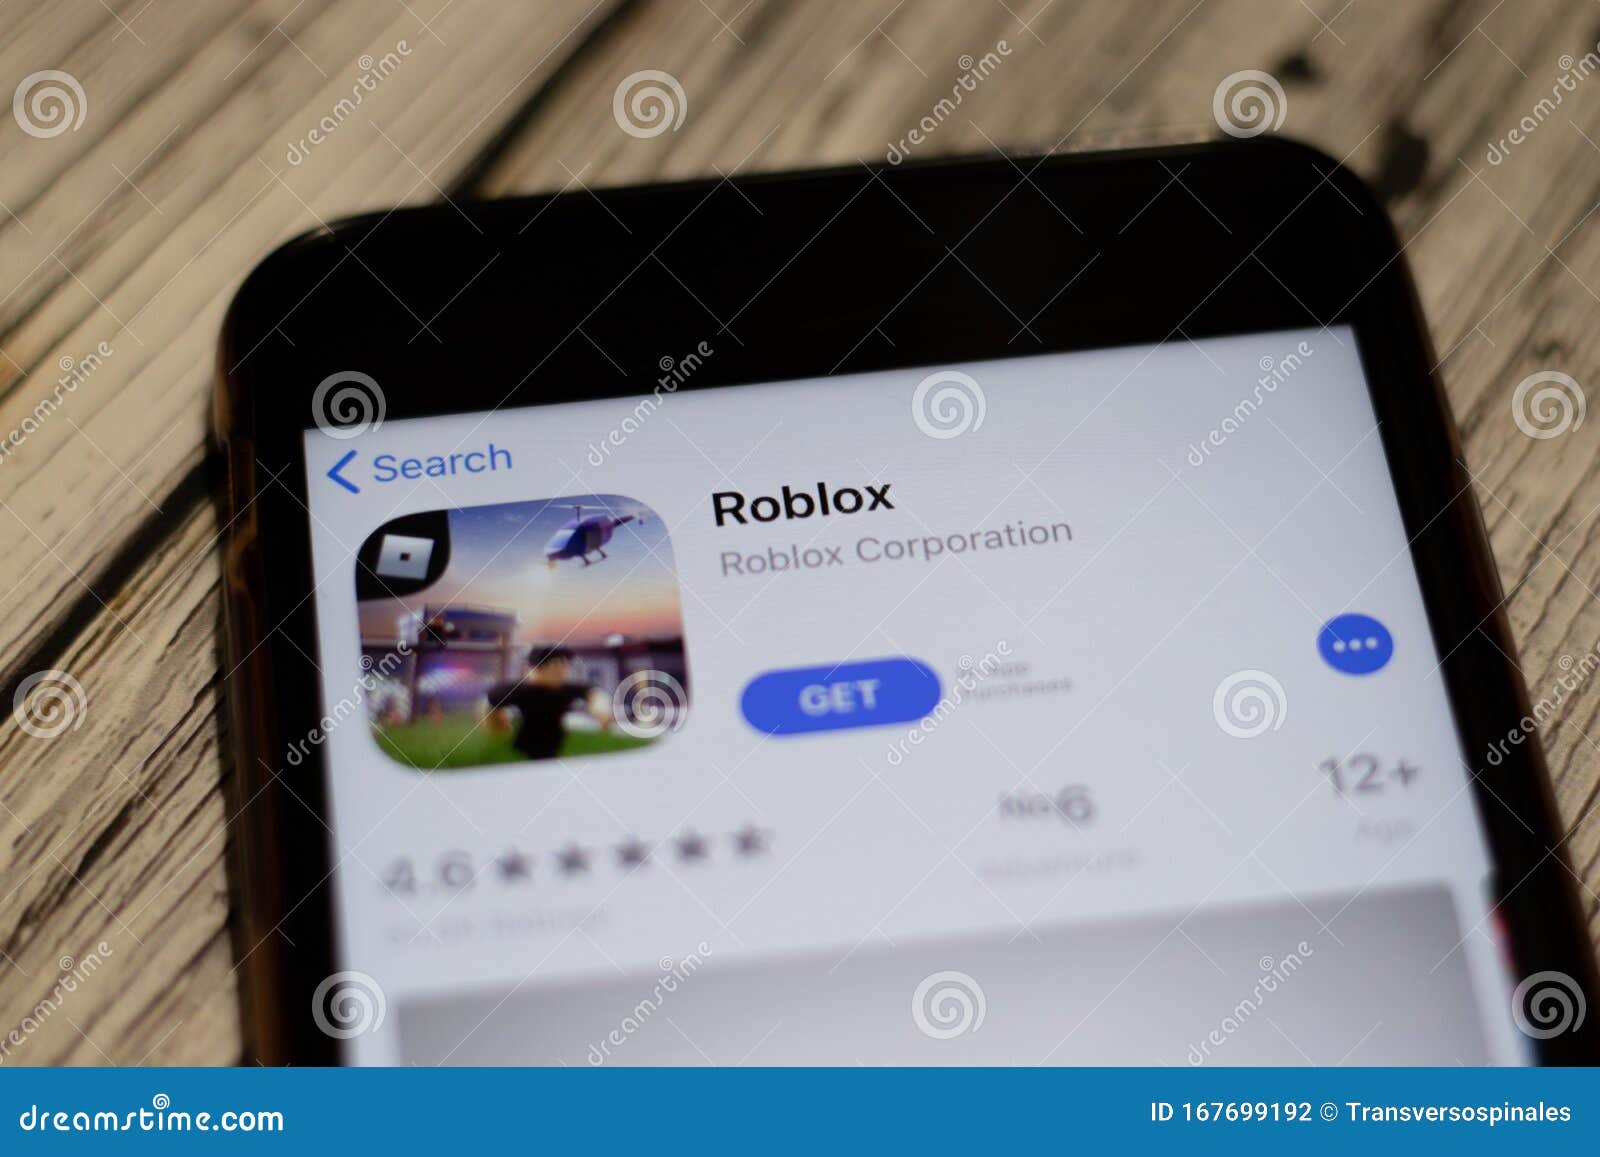 23 Roblox Application Photos Free Royalty Free Stock Photos From Dreamstime - roblox corporation app